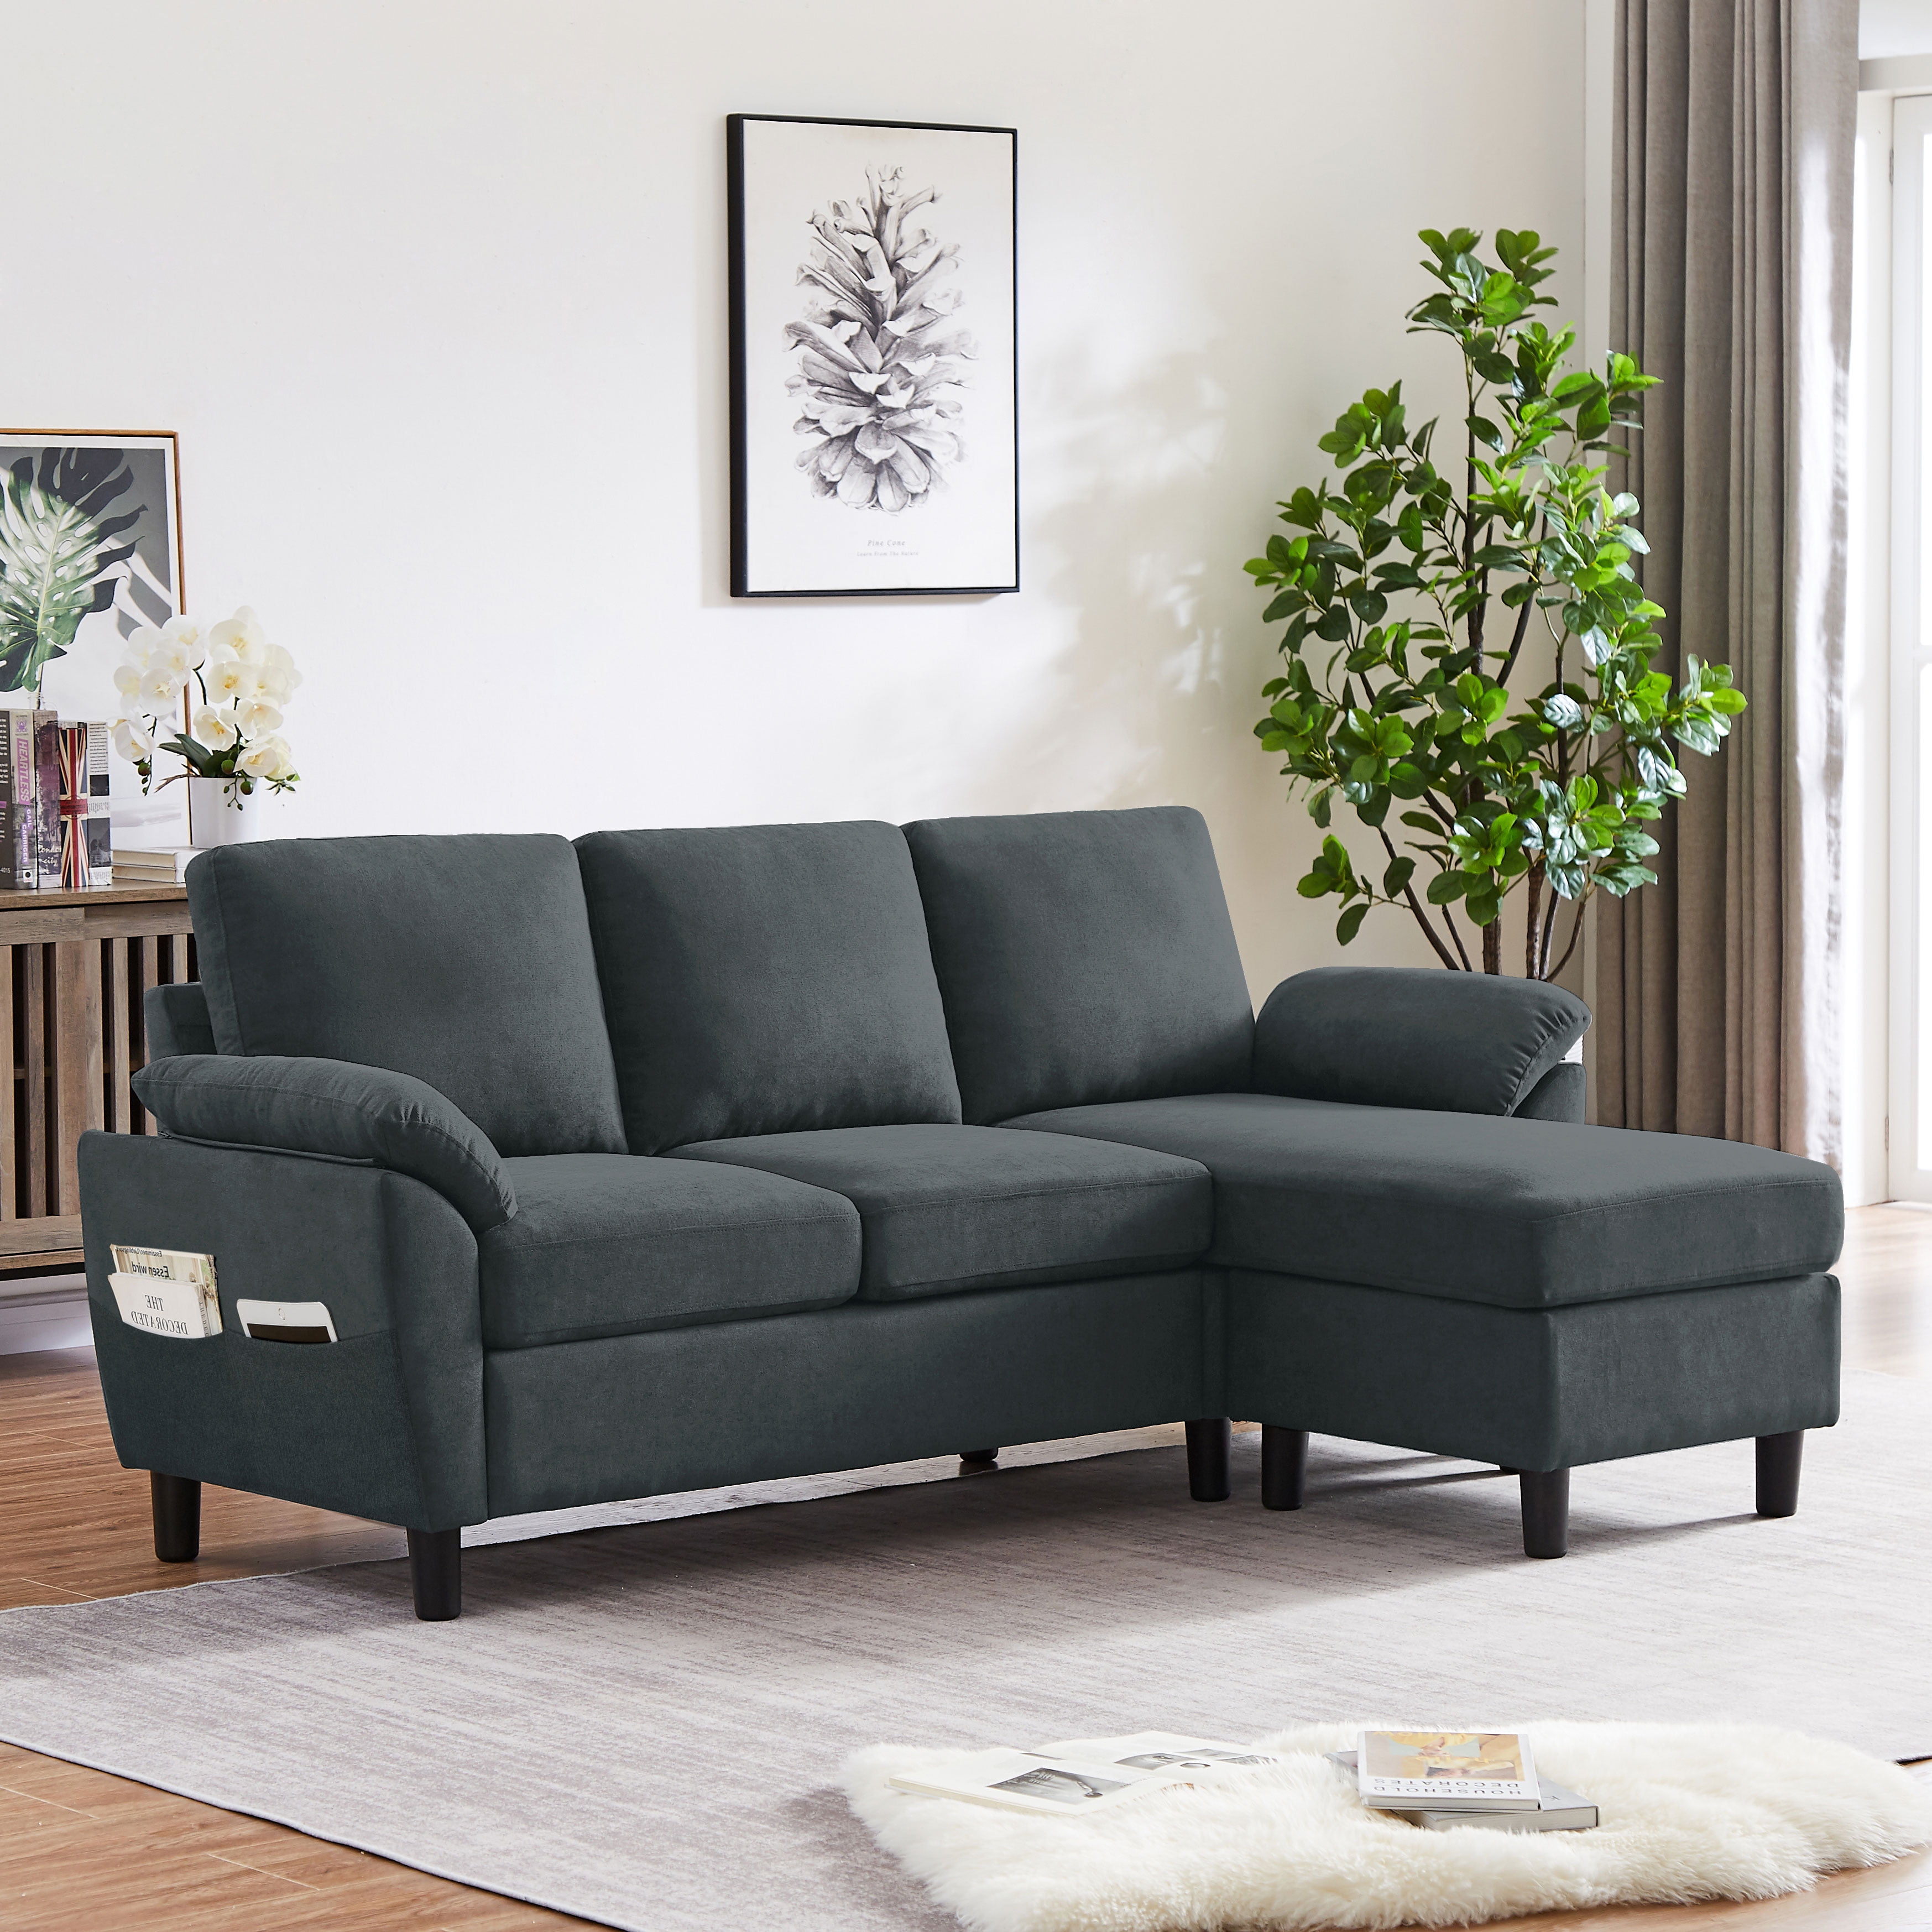 Jayseem Modern Fabric L-Shapped Sofa Sectional Couches for Living Room ...